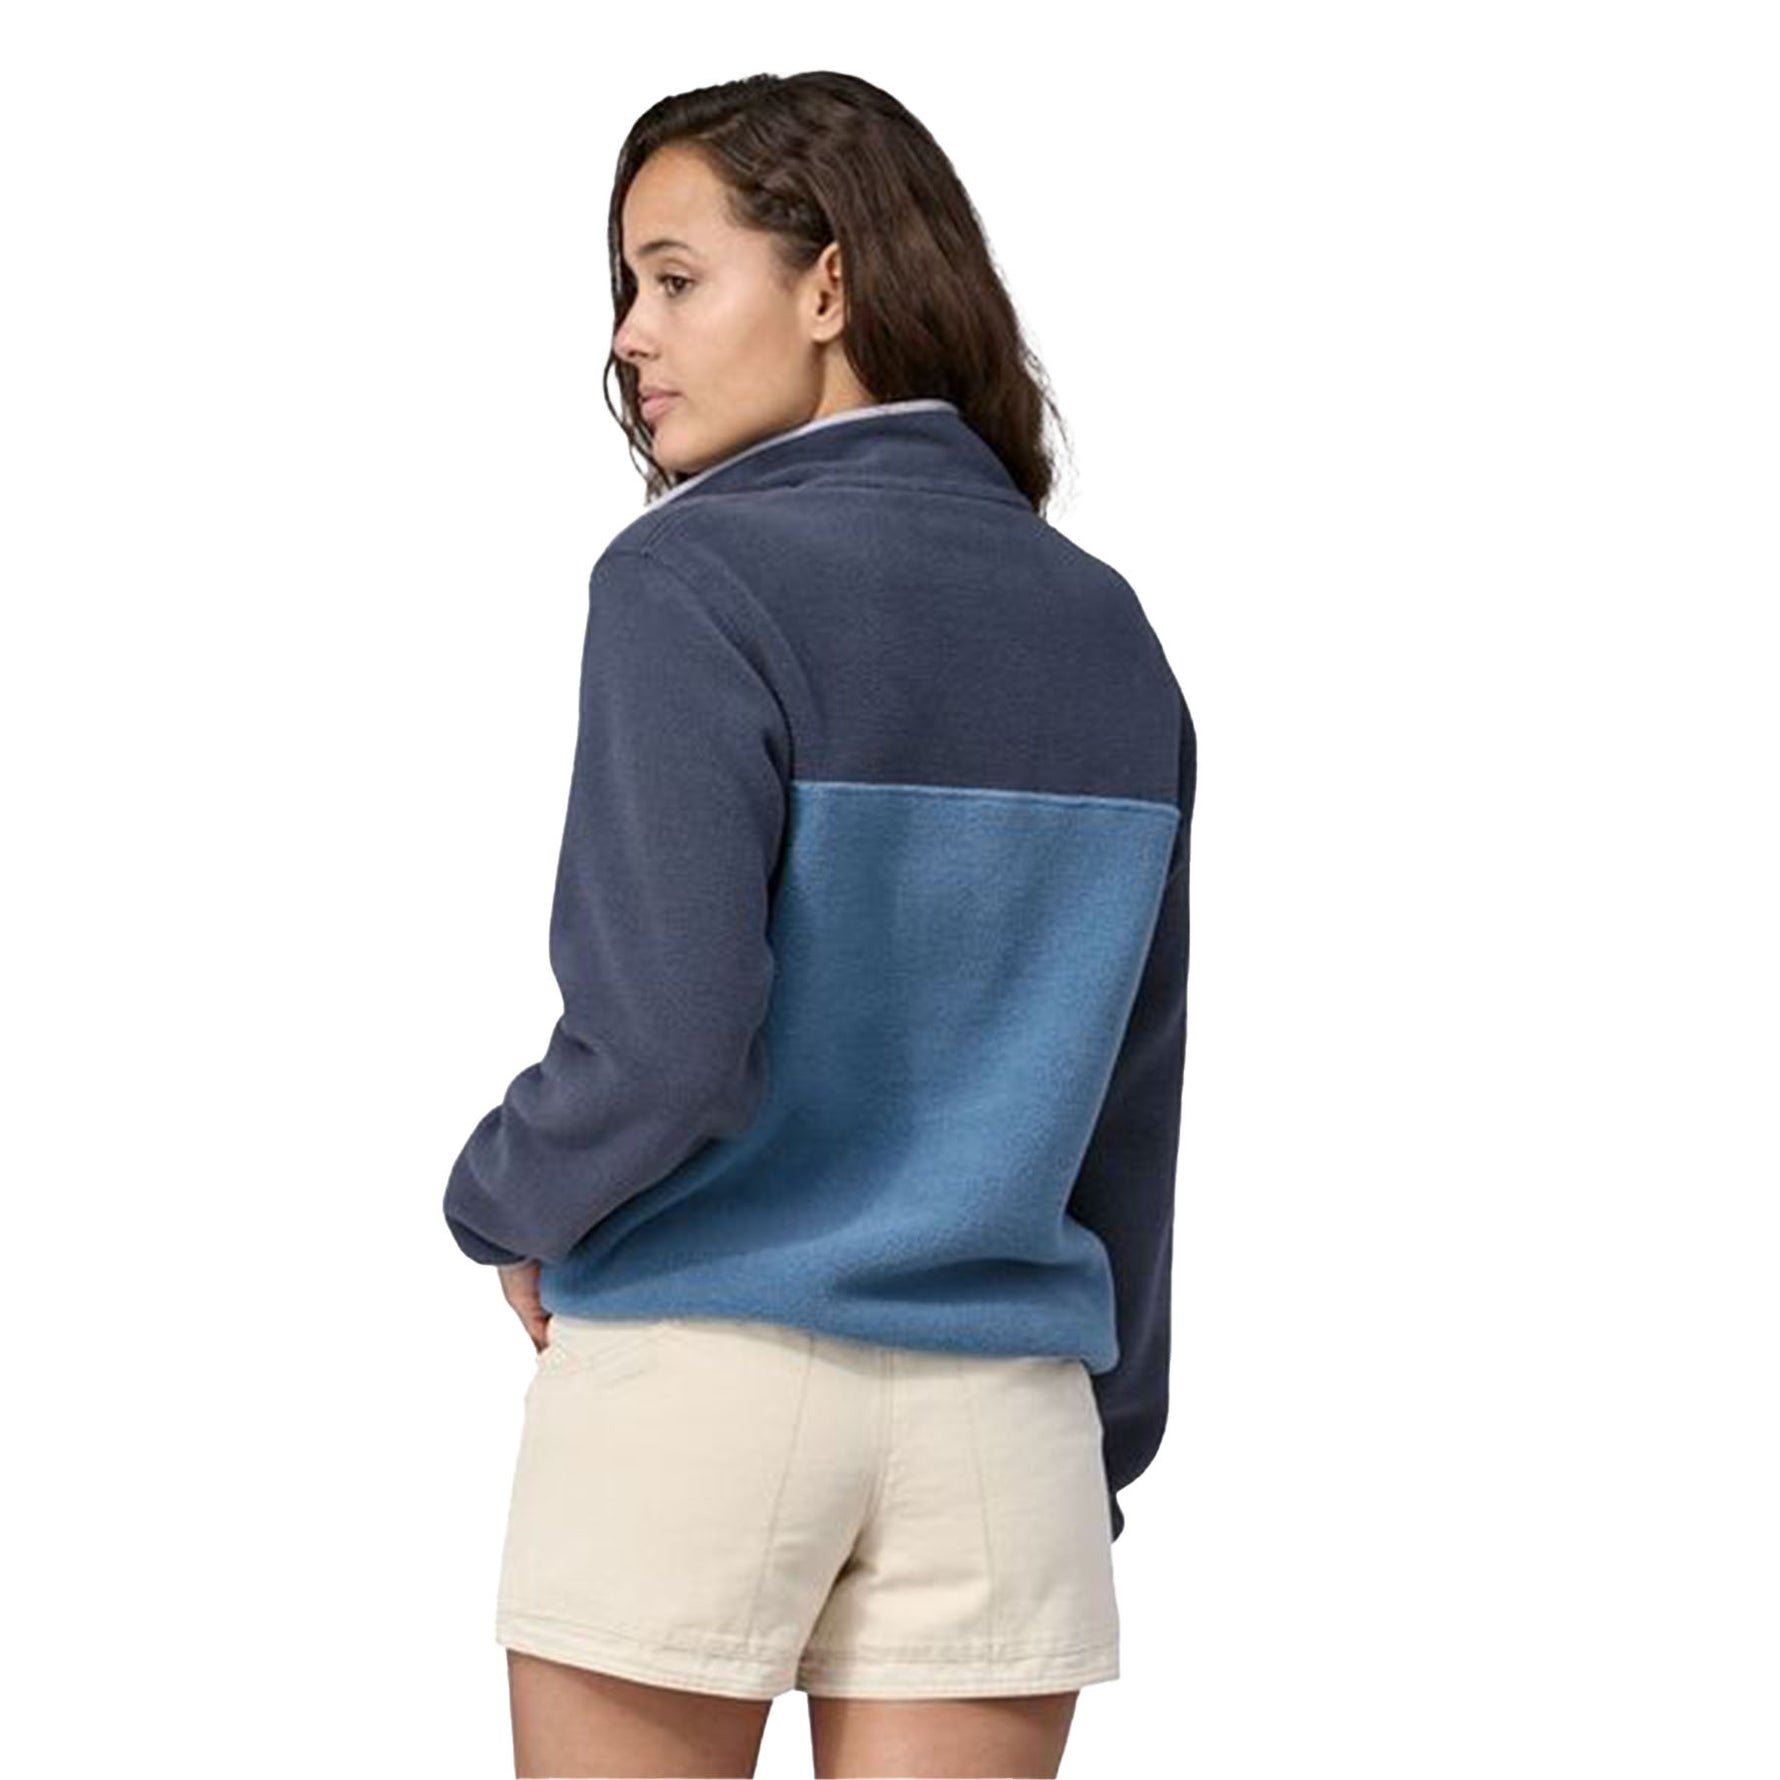 Patagonia Women's Lightweight Synch Snap-T Pullover 